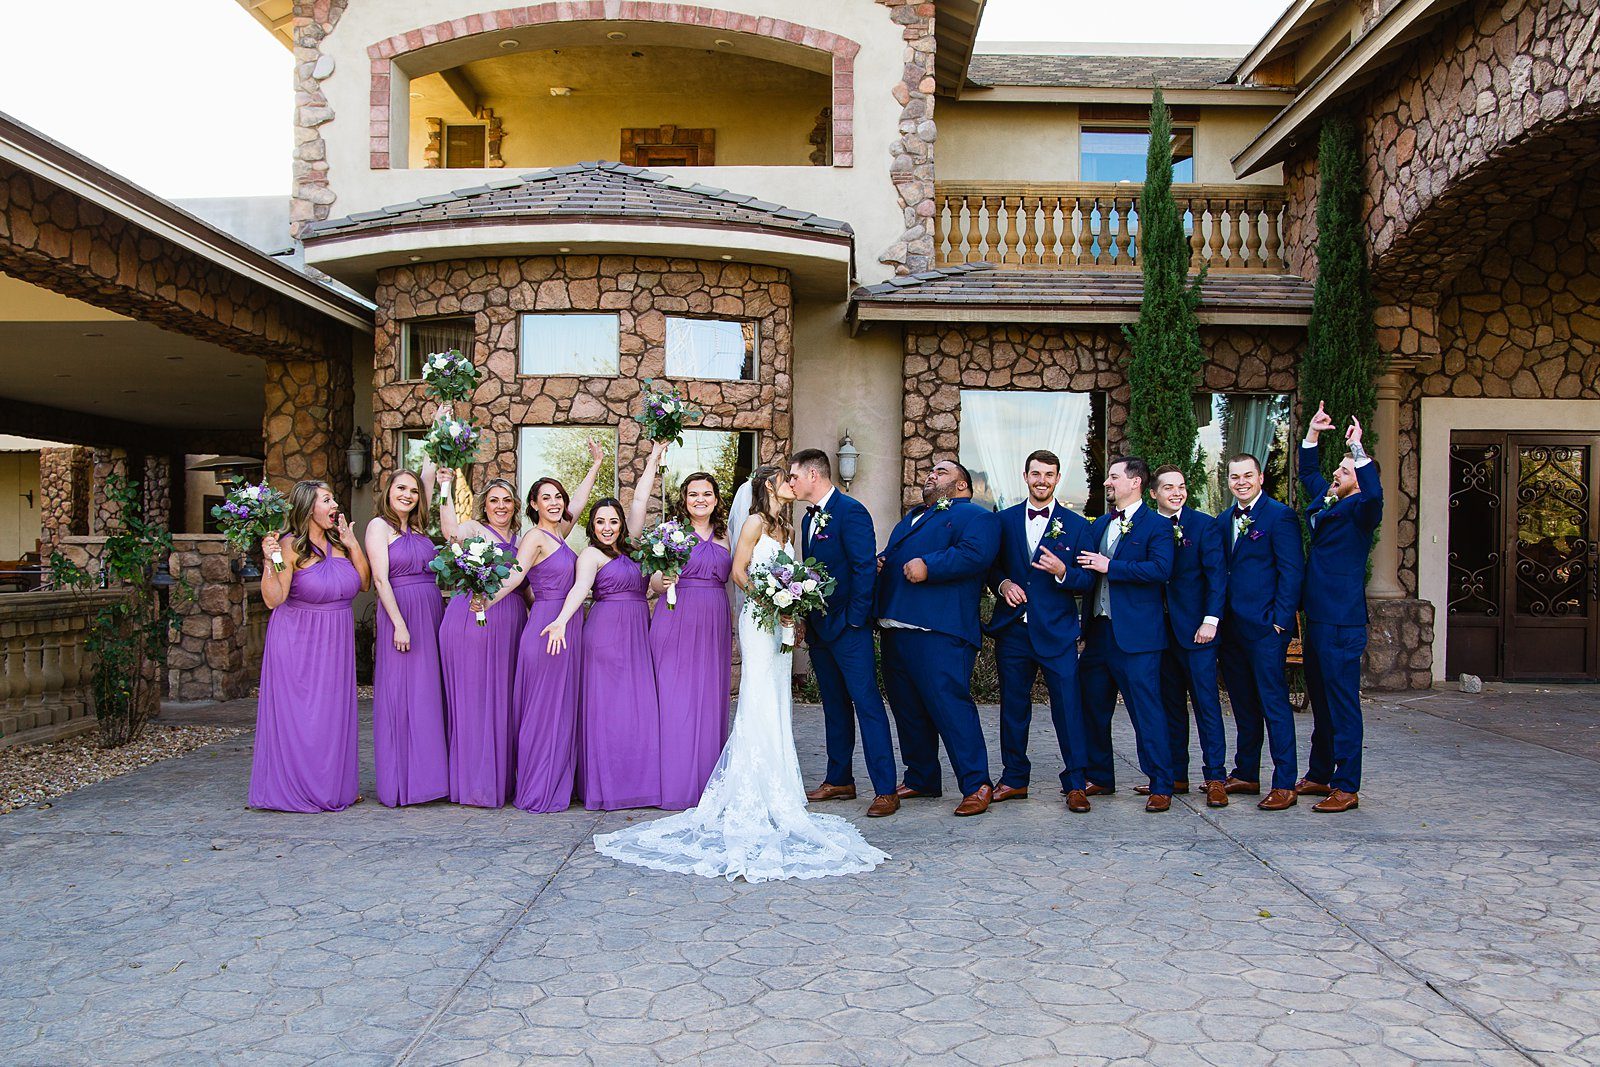 Bridal party having fun together at Superstition Manor weding by Arizona wedding photographer PMA Photography.